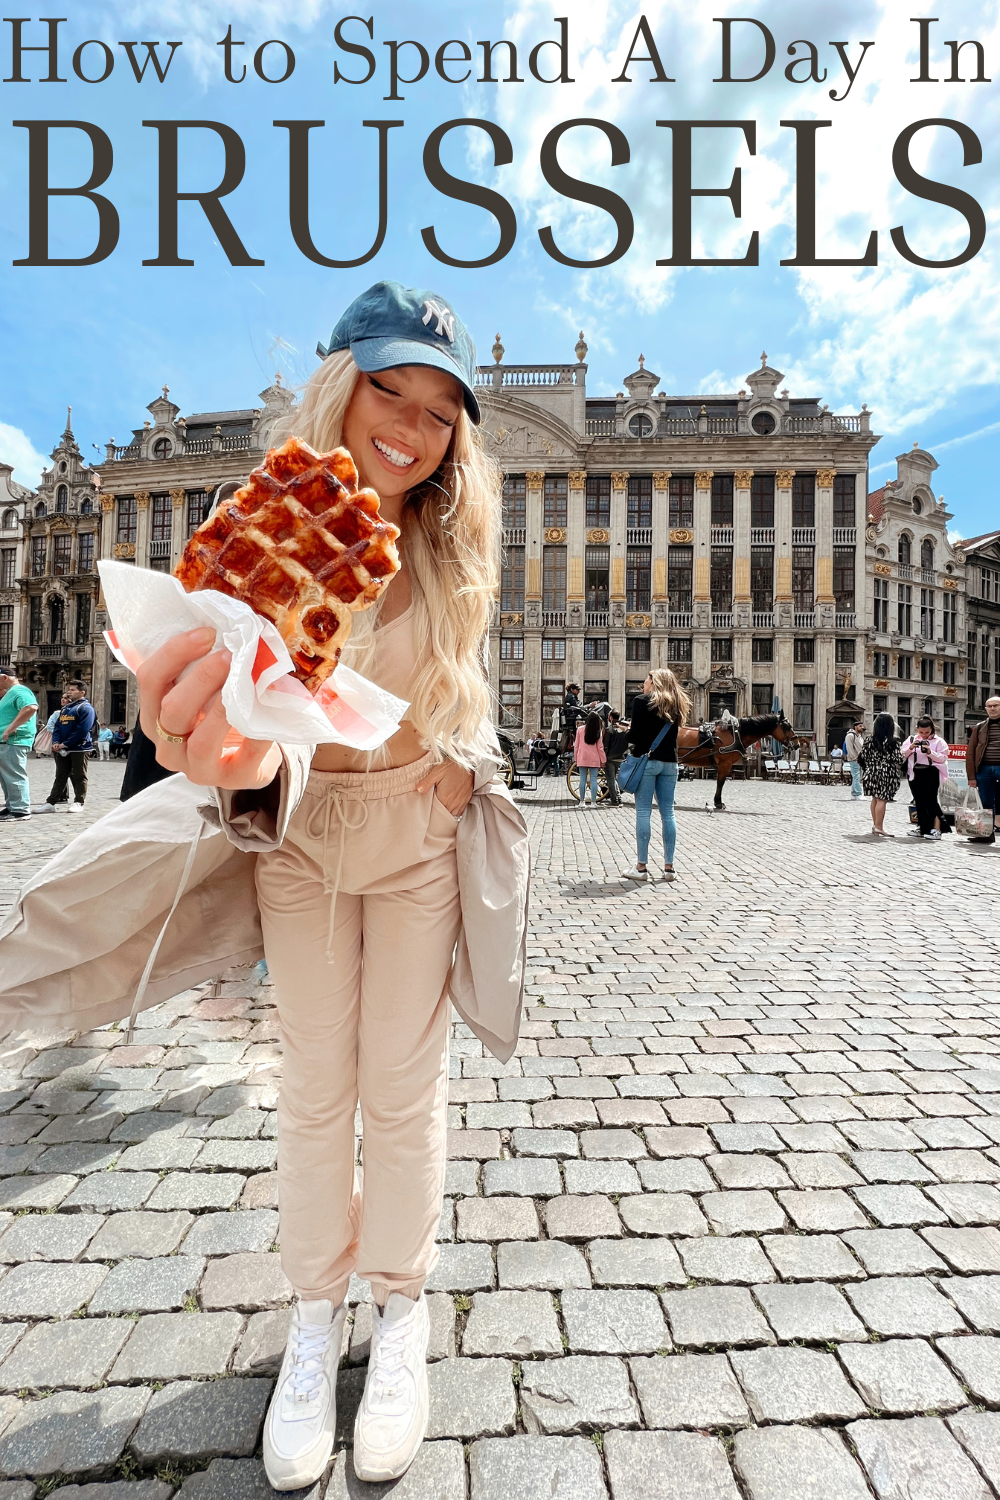 How to spend a day in brussels alison kay bowles